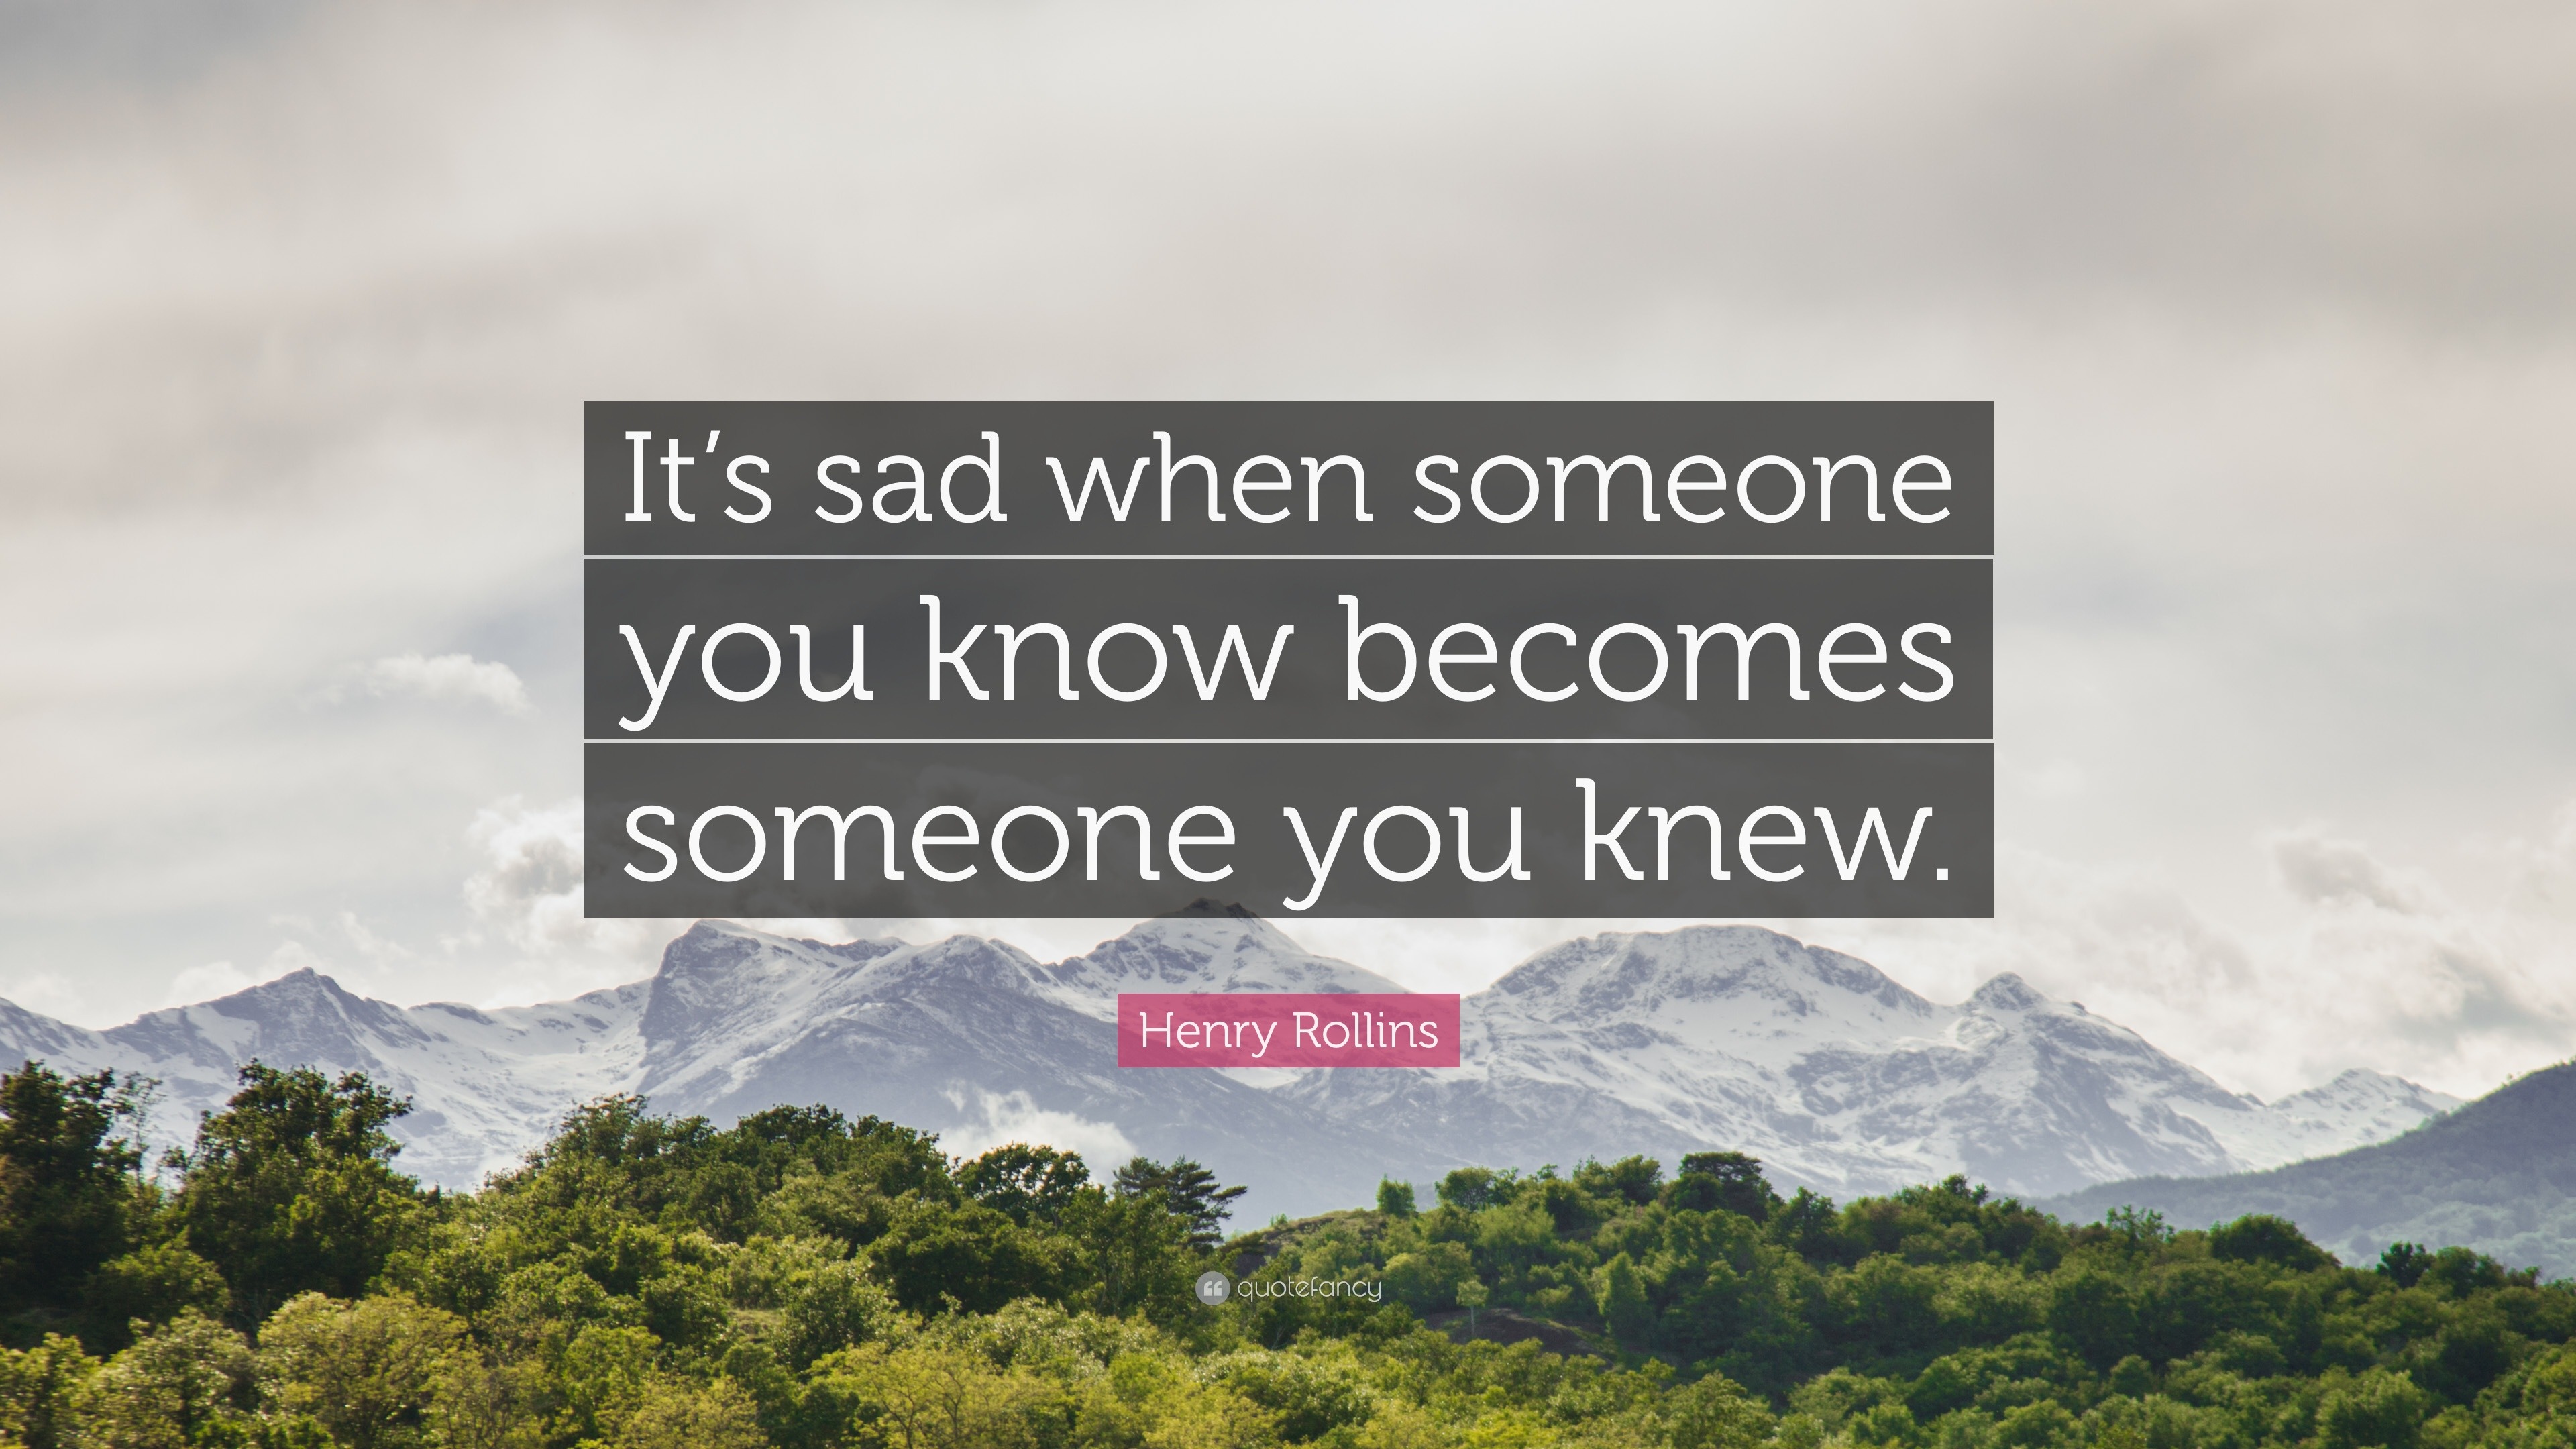 Henry Rollins Quote: “It’s sad when someone you know becomes someone ...